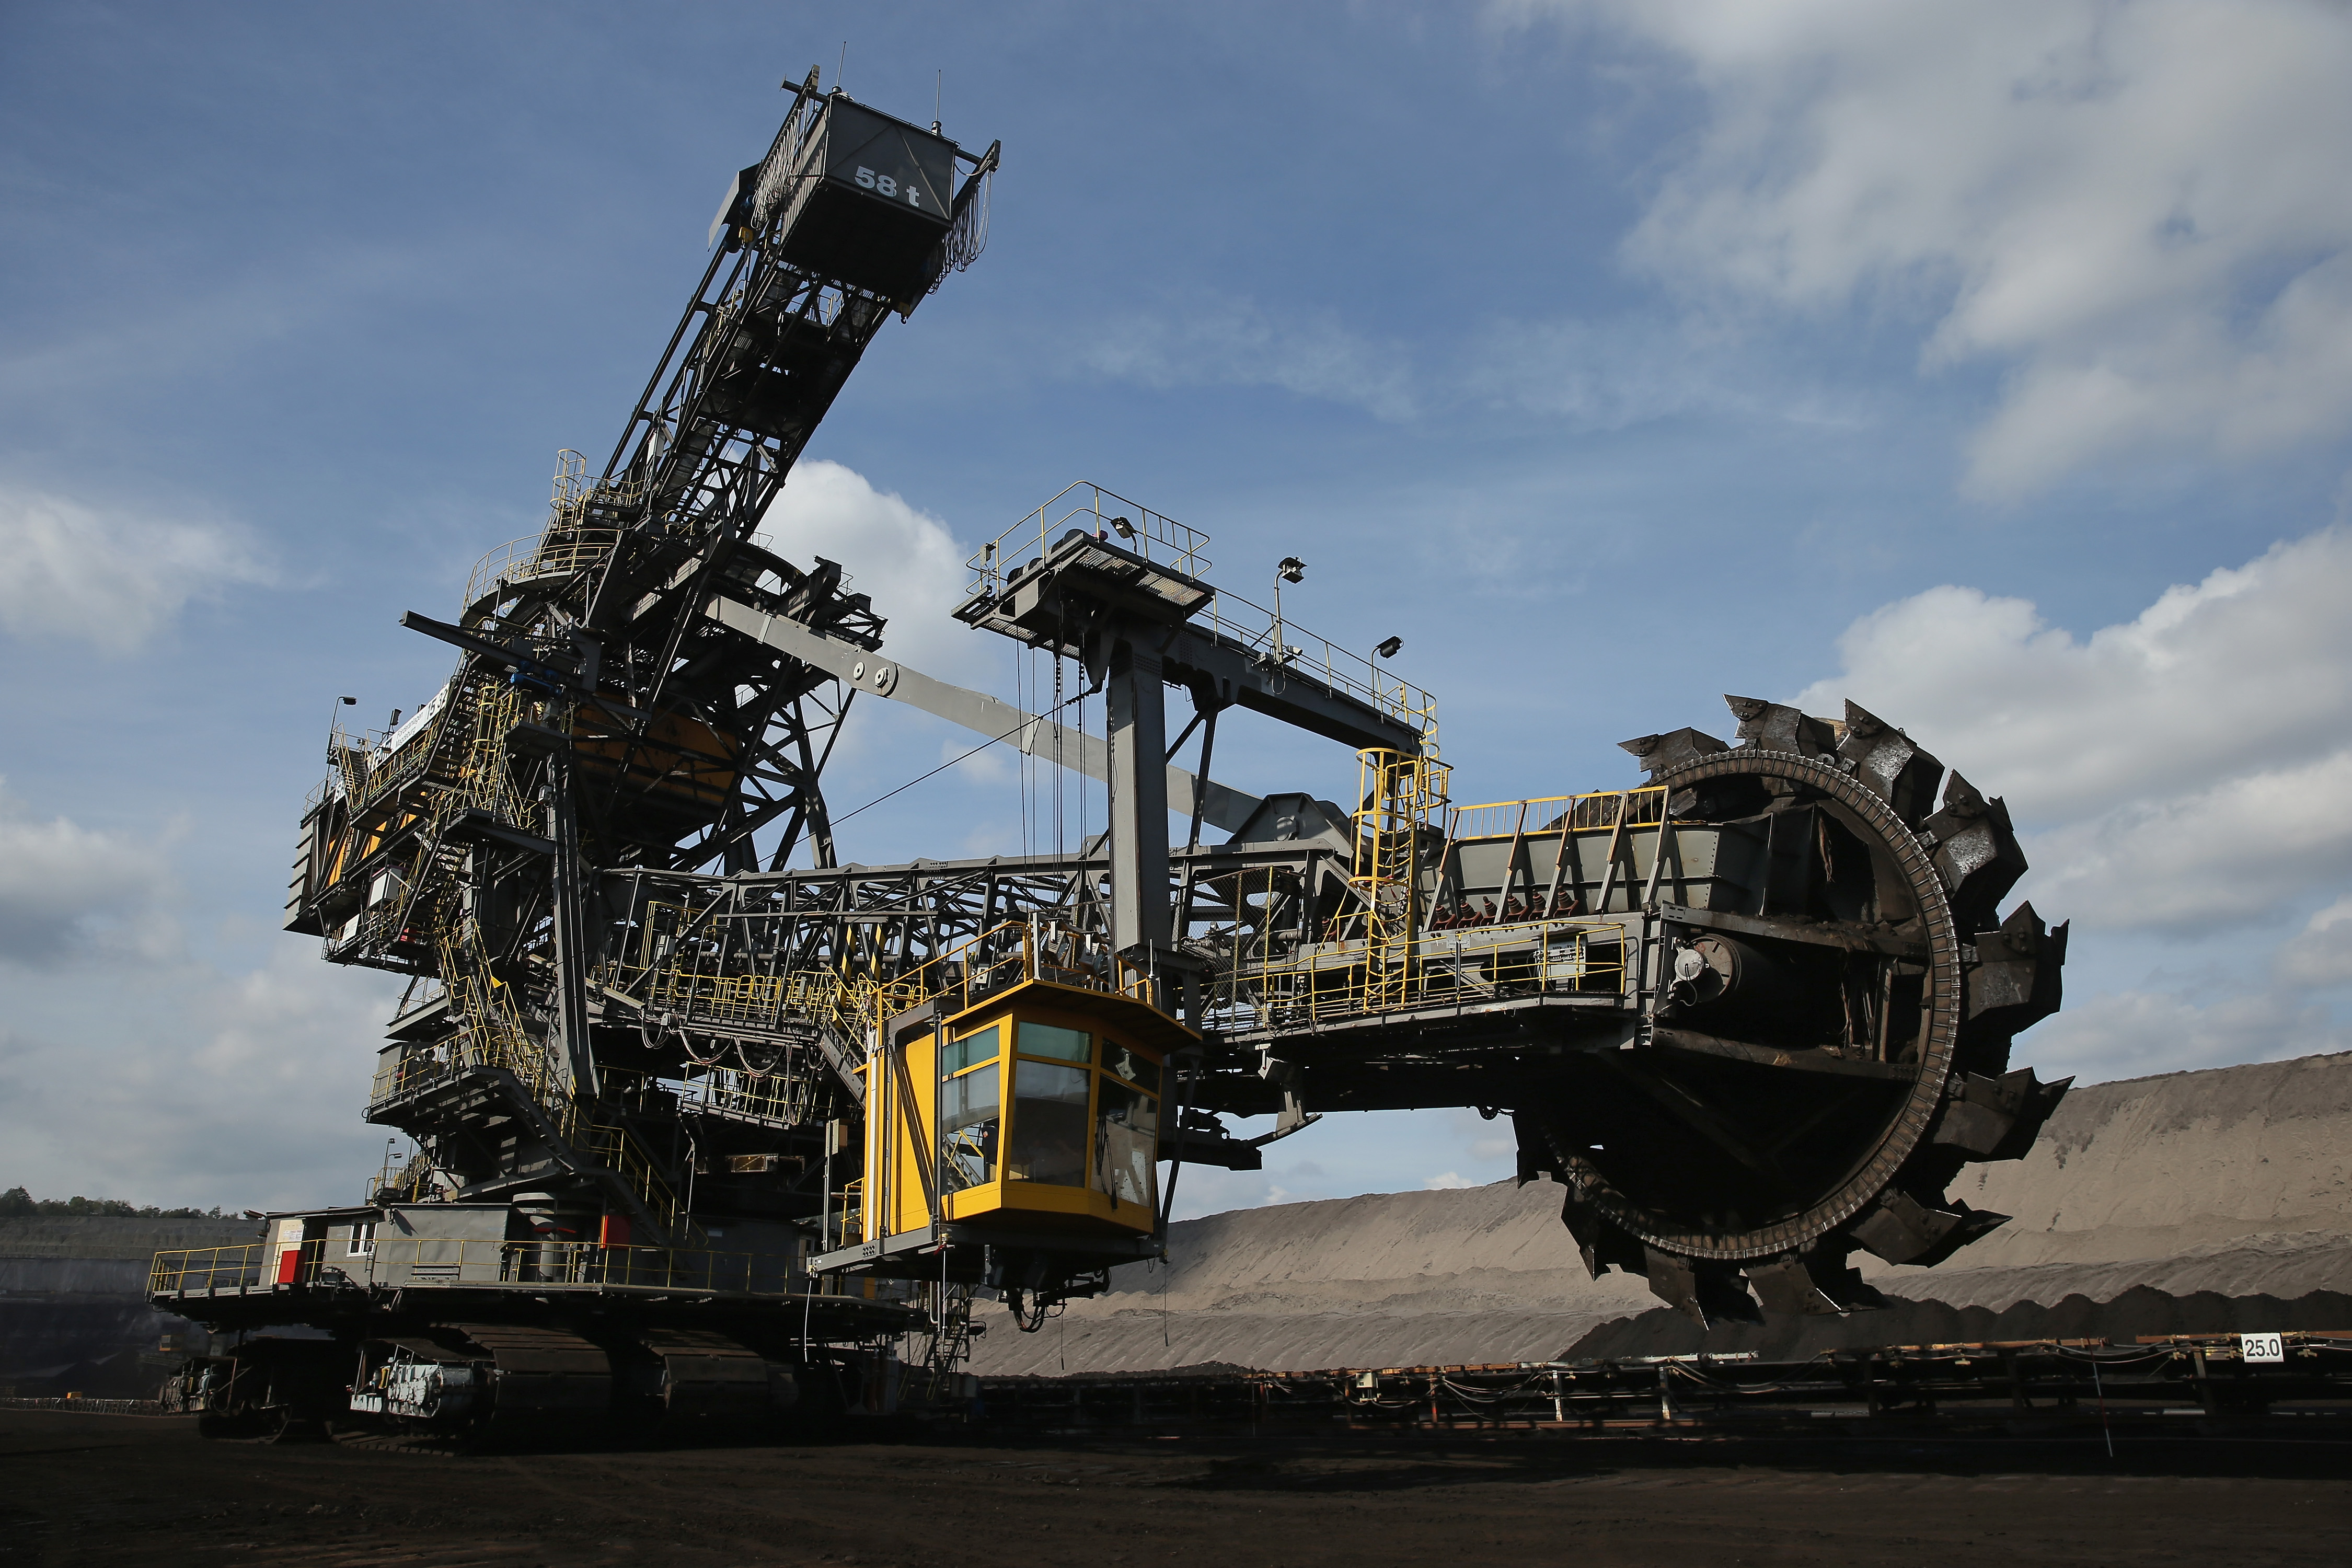 A bucket wheel excavator moves into position in an open-pit lignite coal mine by Sean Gallup